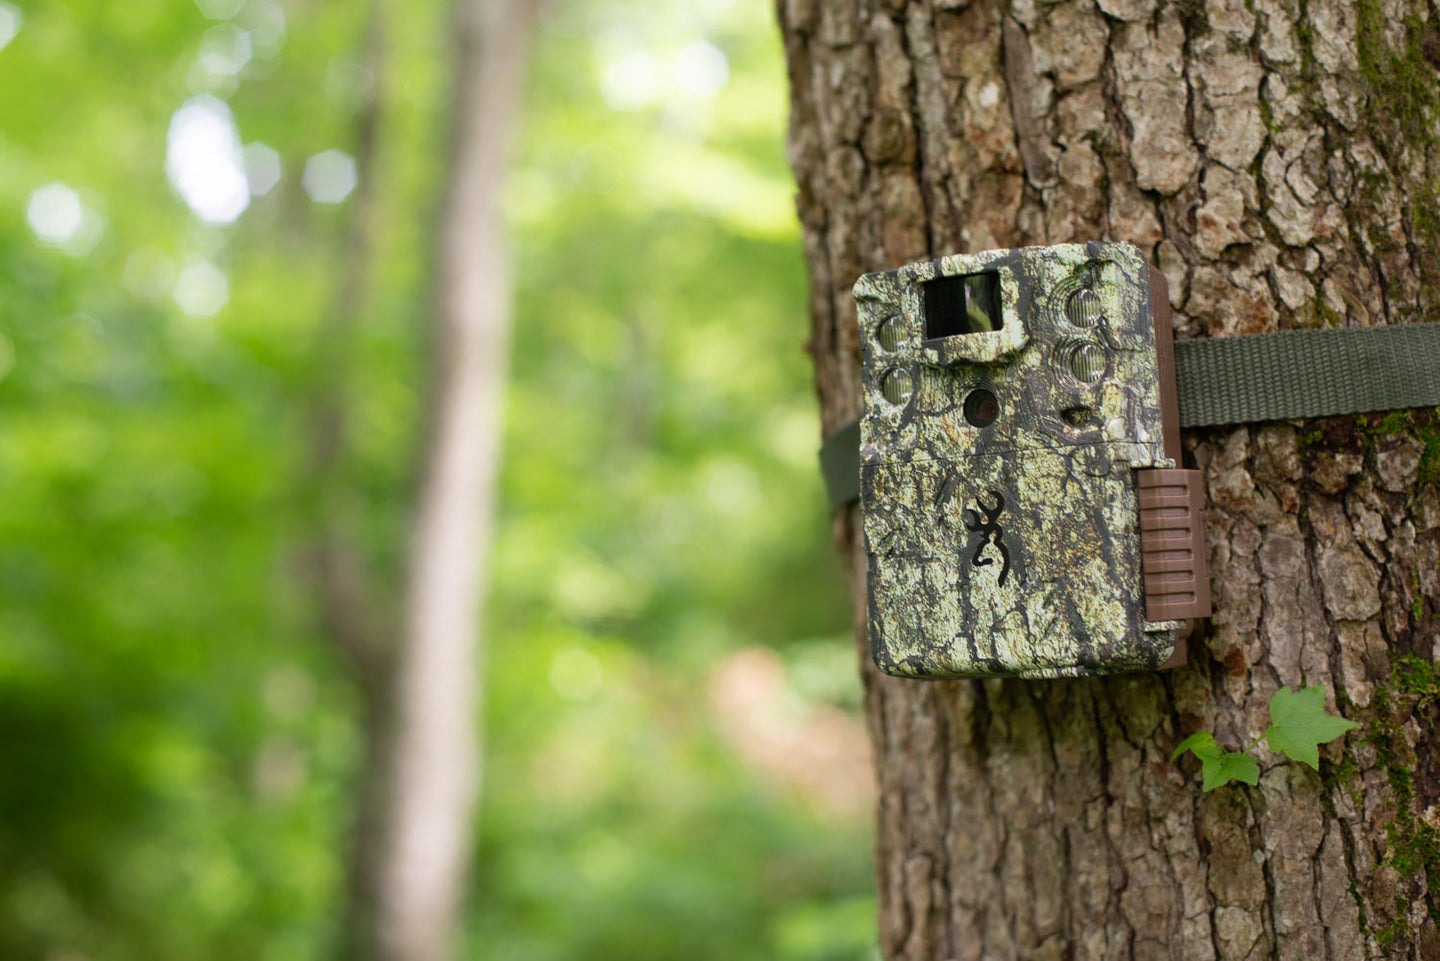 Here are some tips on how to successfully use a trail camera.